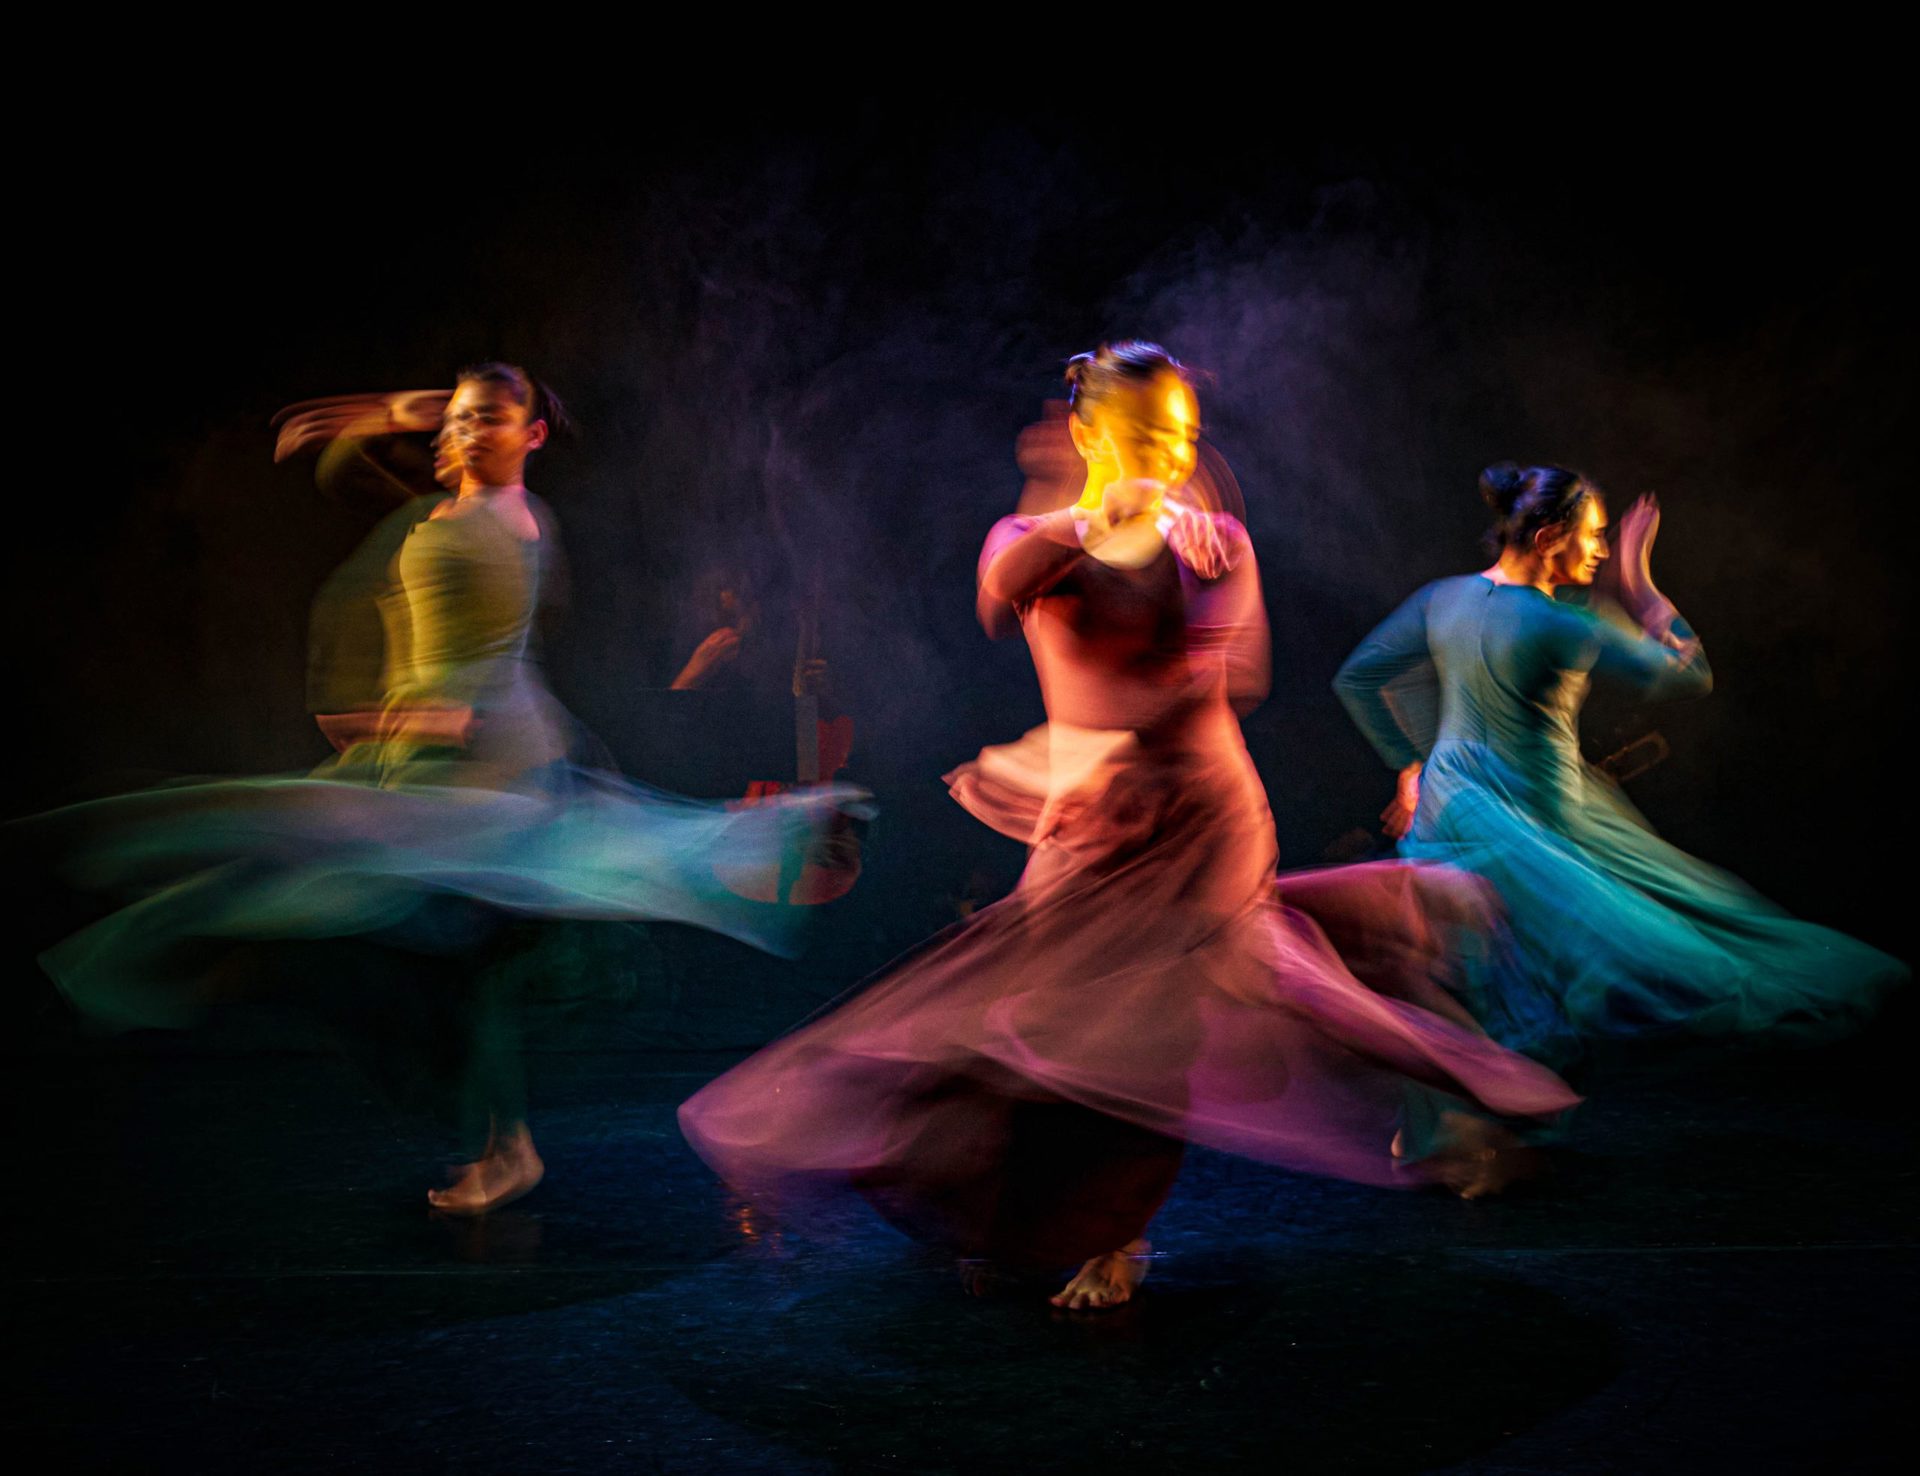 Three female south asian dancers spinning in dresses with motion blur